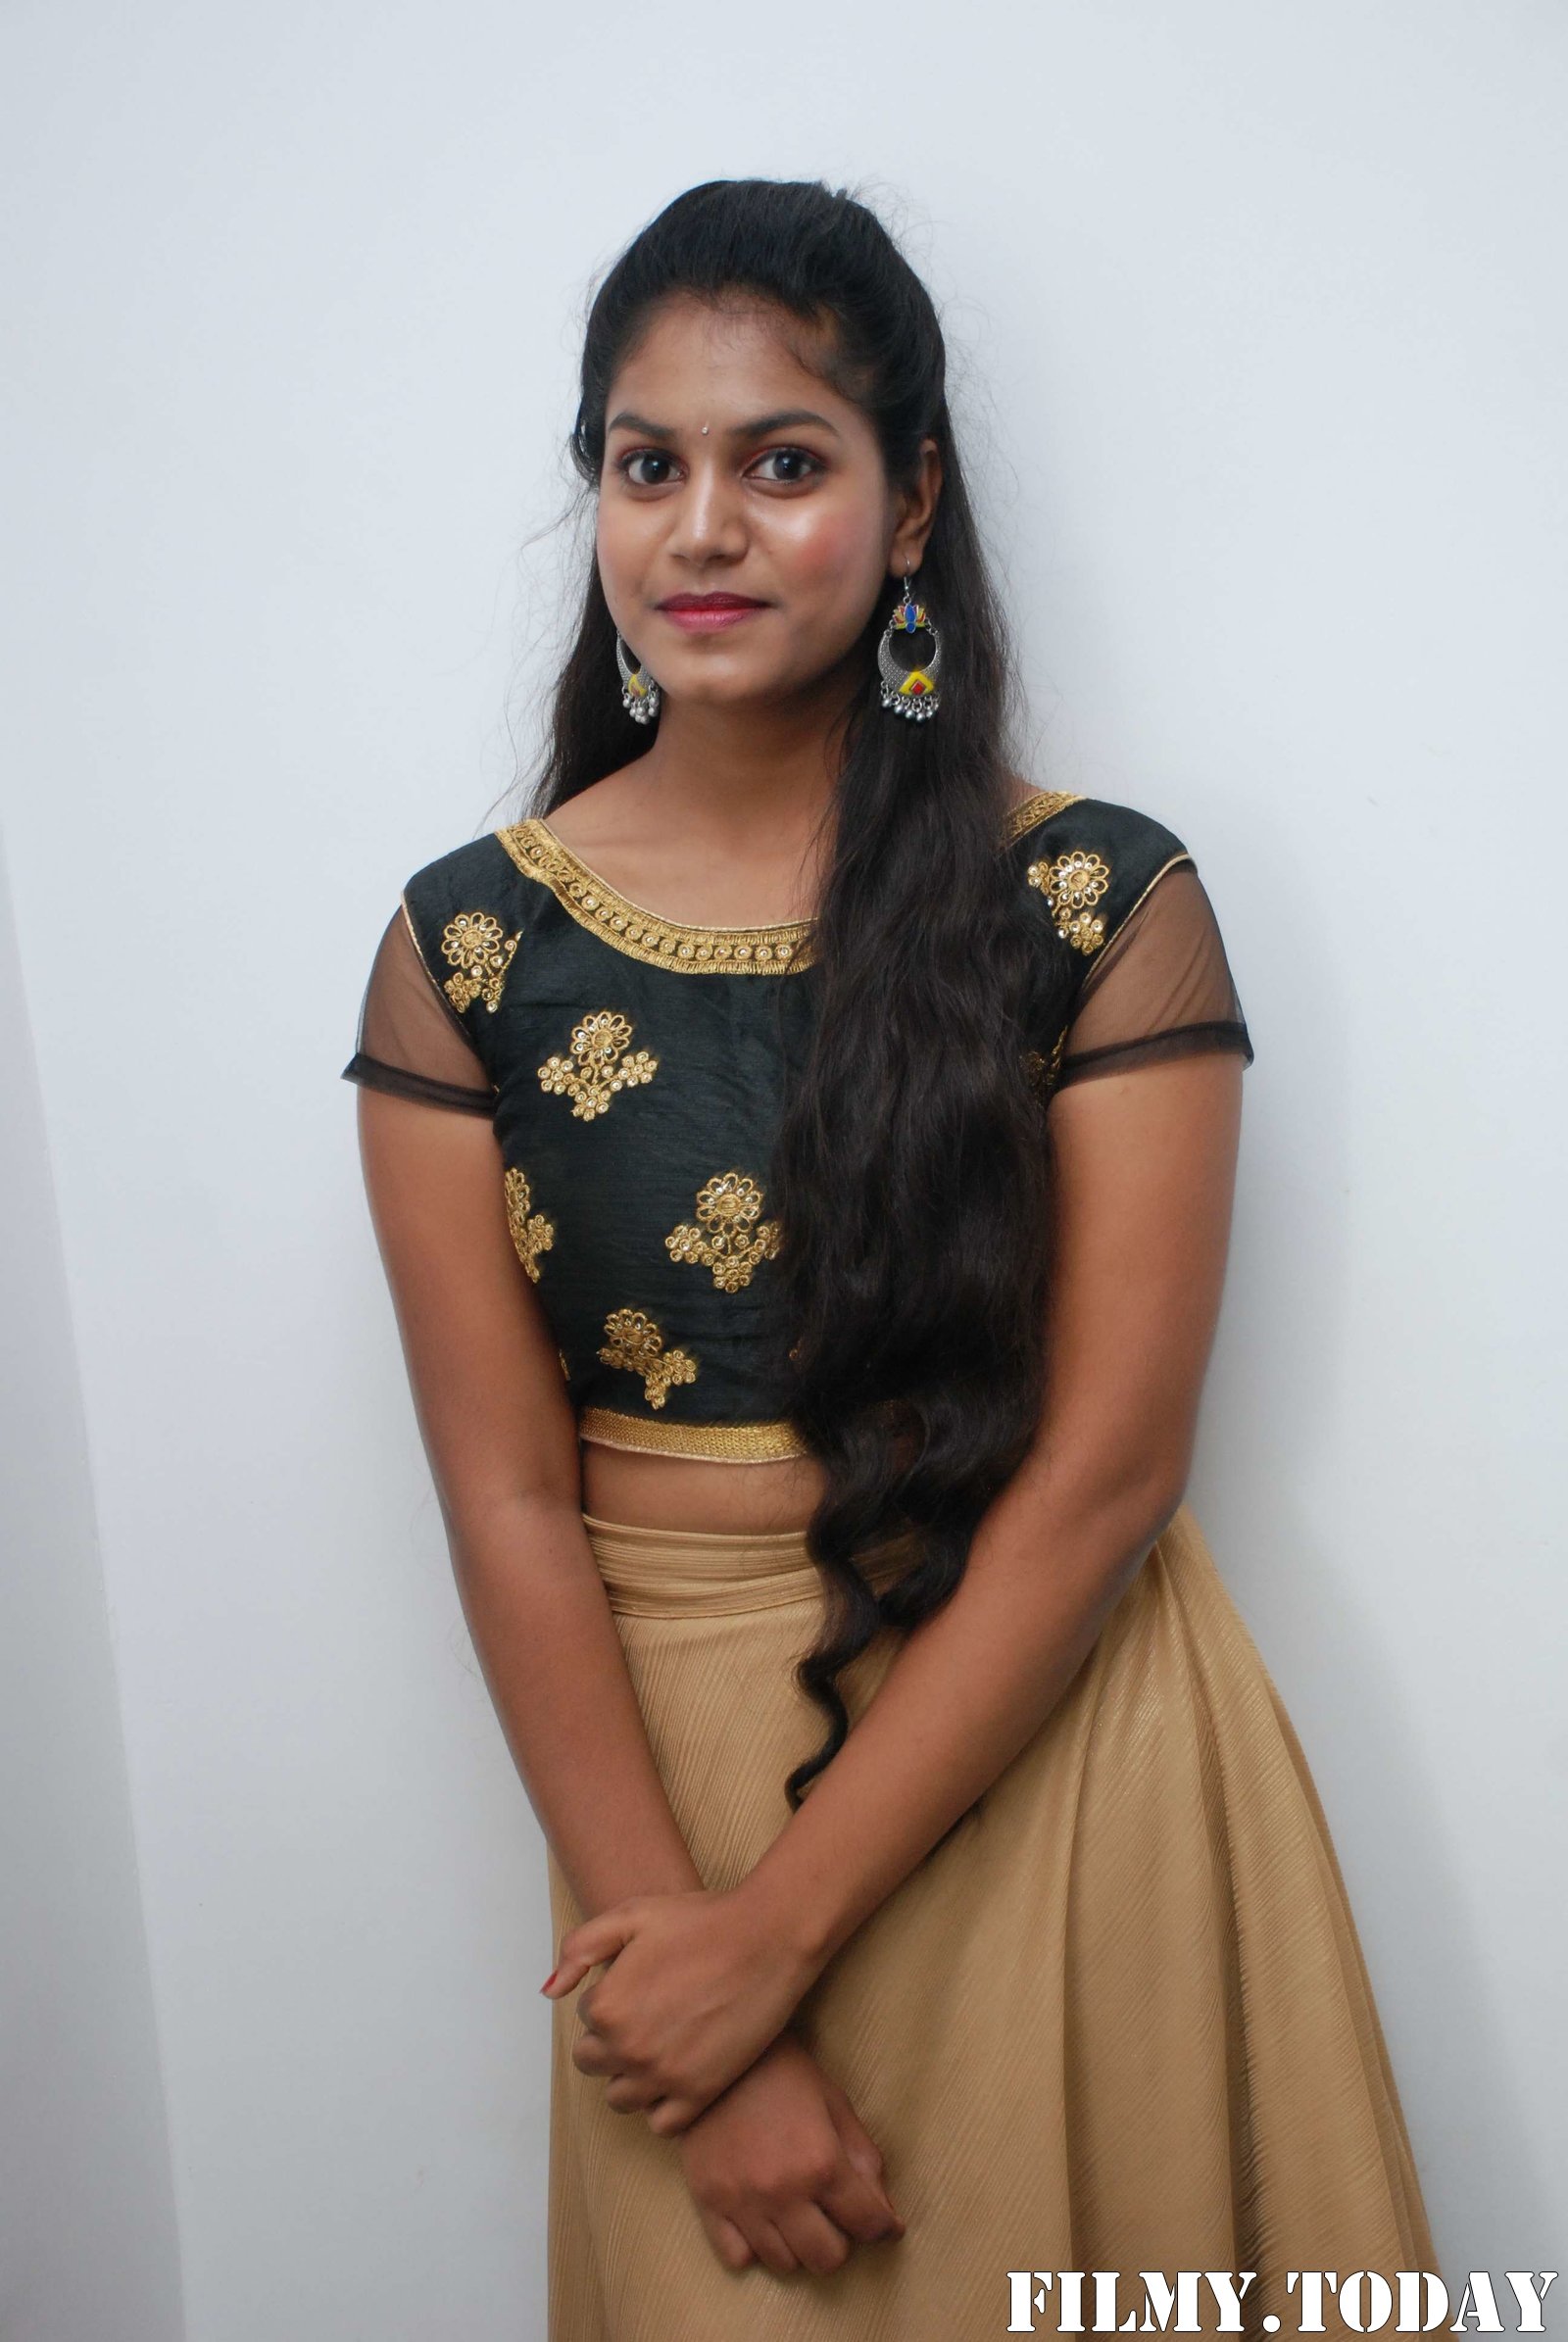 Chandana (Tanike) - Tanike Movie Audio Launch Pictures | Picture 1679158